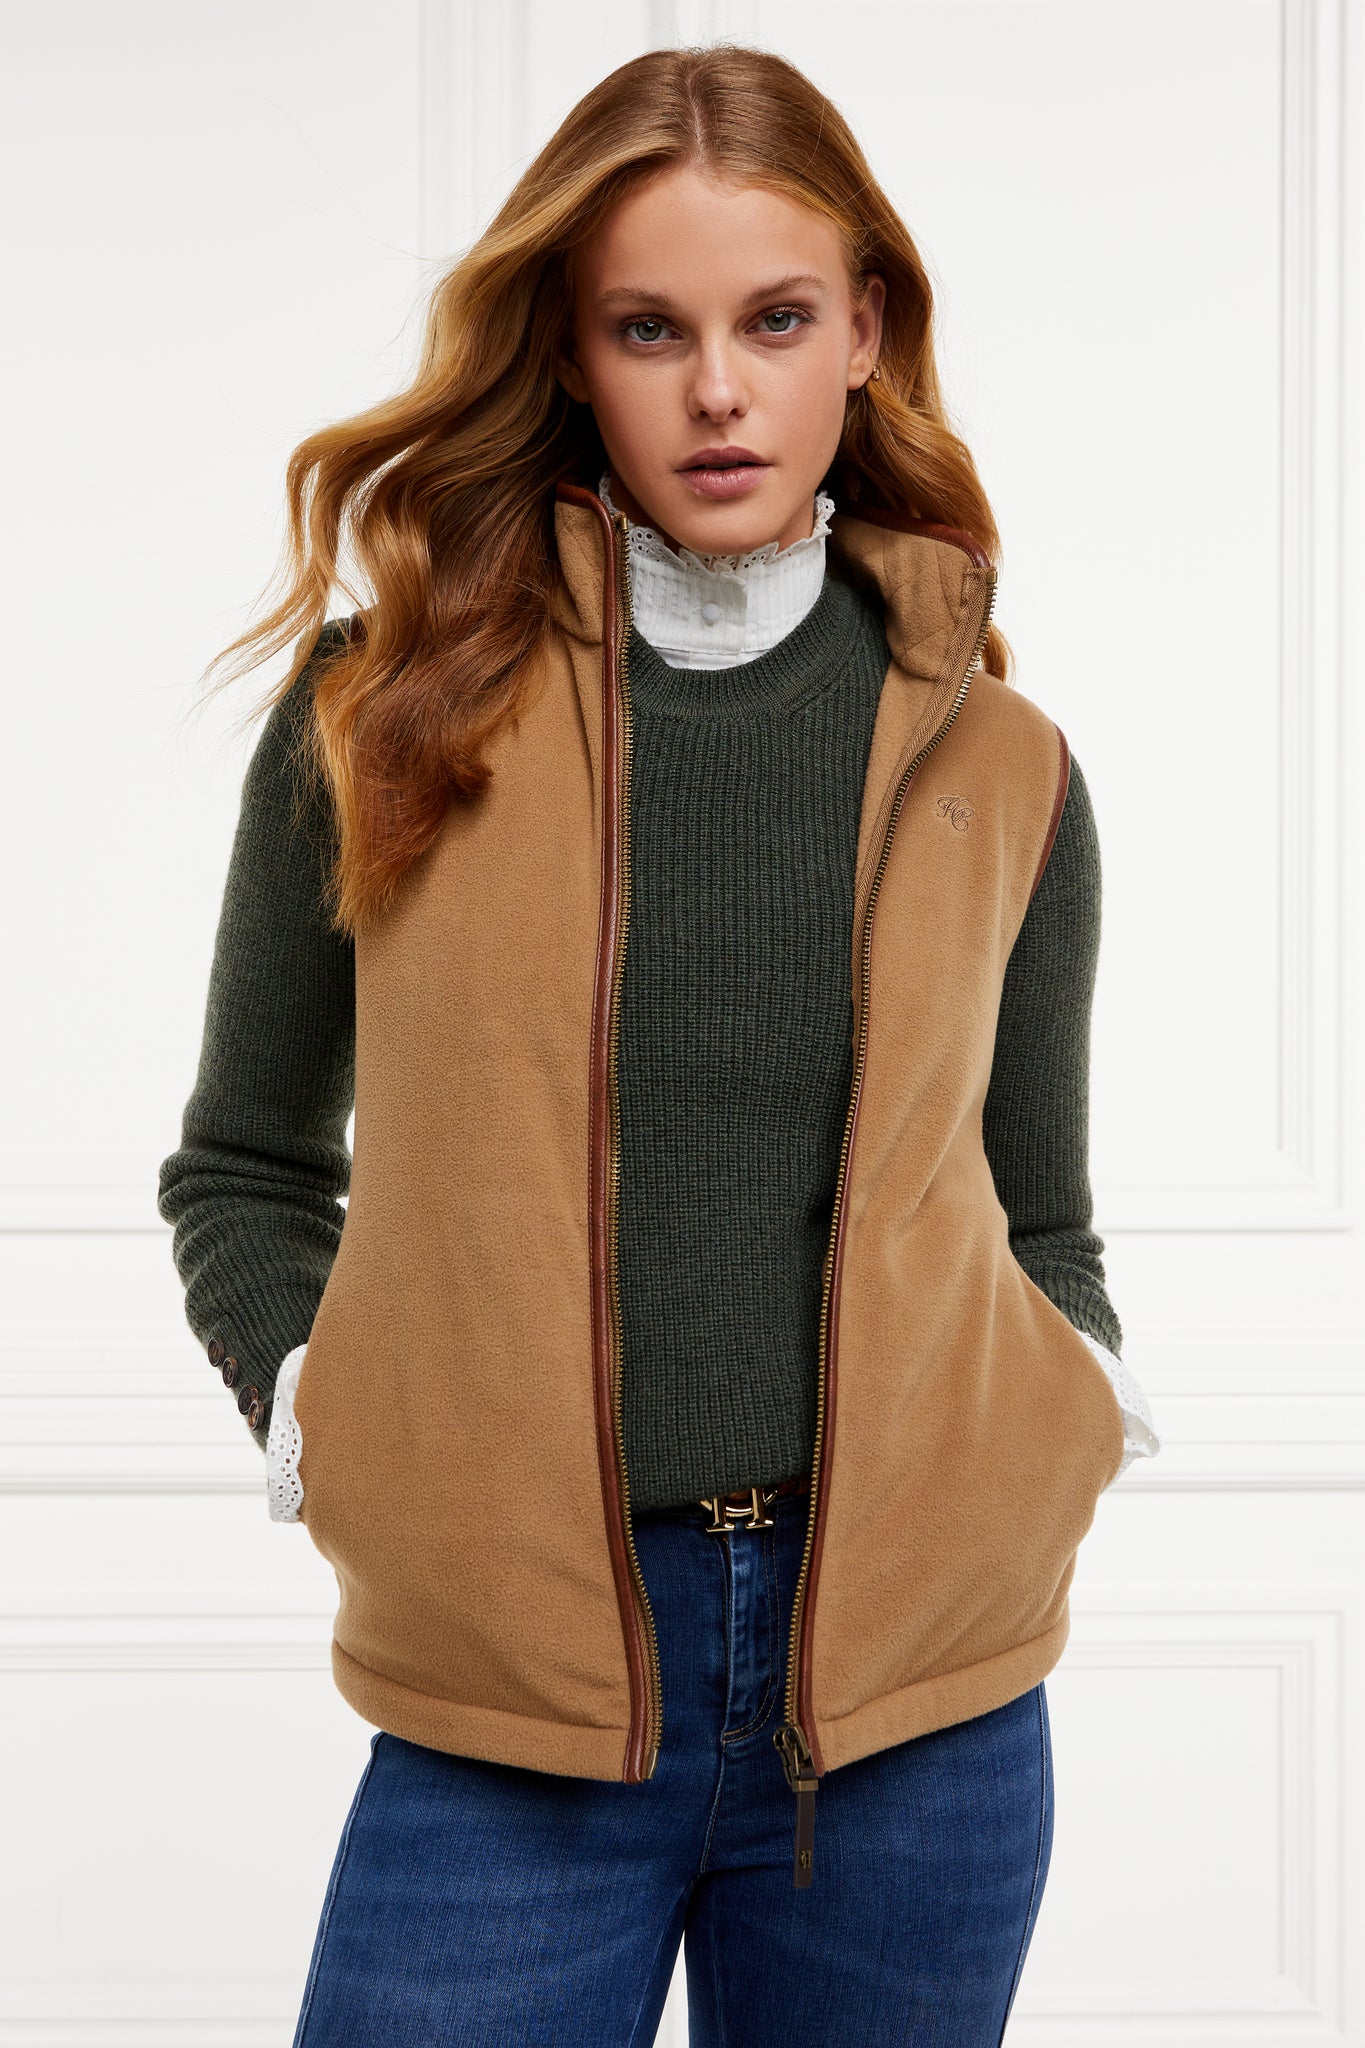 womens fleece gilet in light brown with dark brown leather piping around armholes neckline and down the front zip fastening a dark green knitted sweatshirt a white long sleeve shirt and dark denim skinny jeans